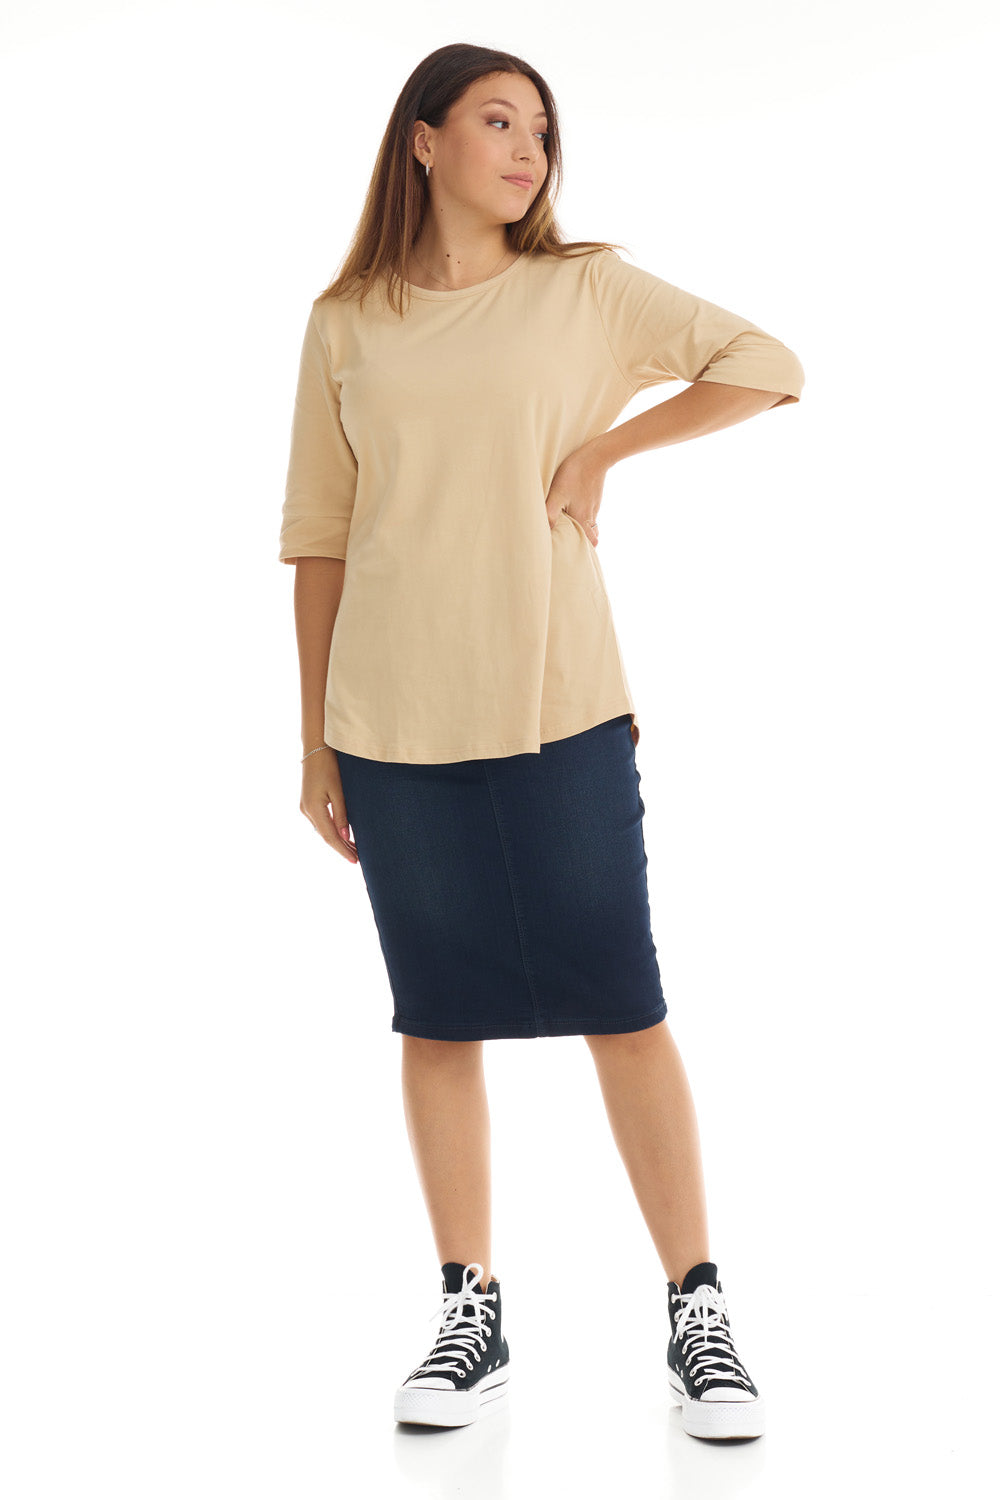 light brown crew neck top for women with cuff sleeve